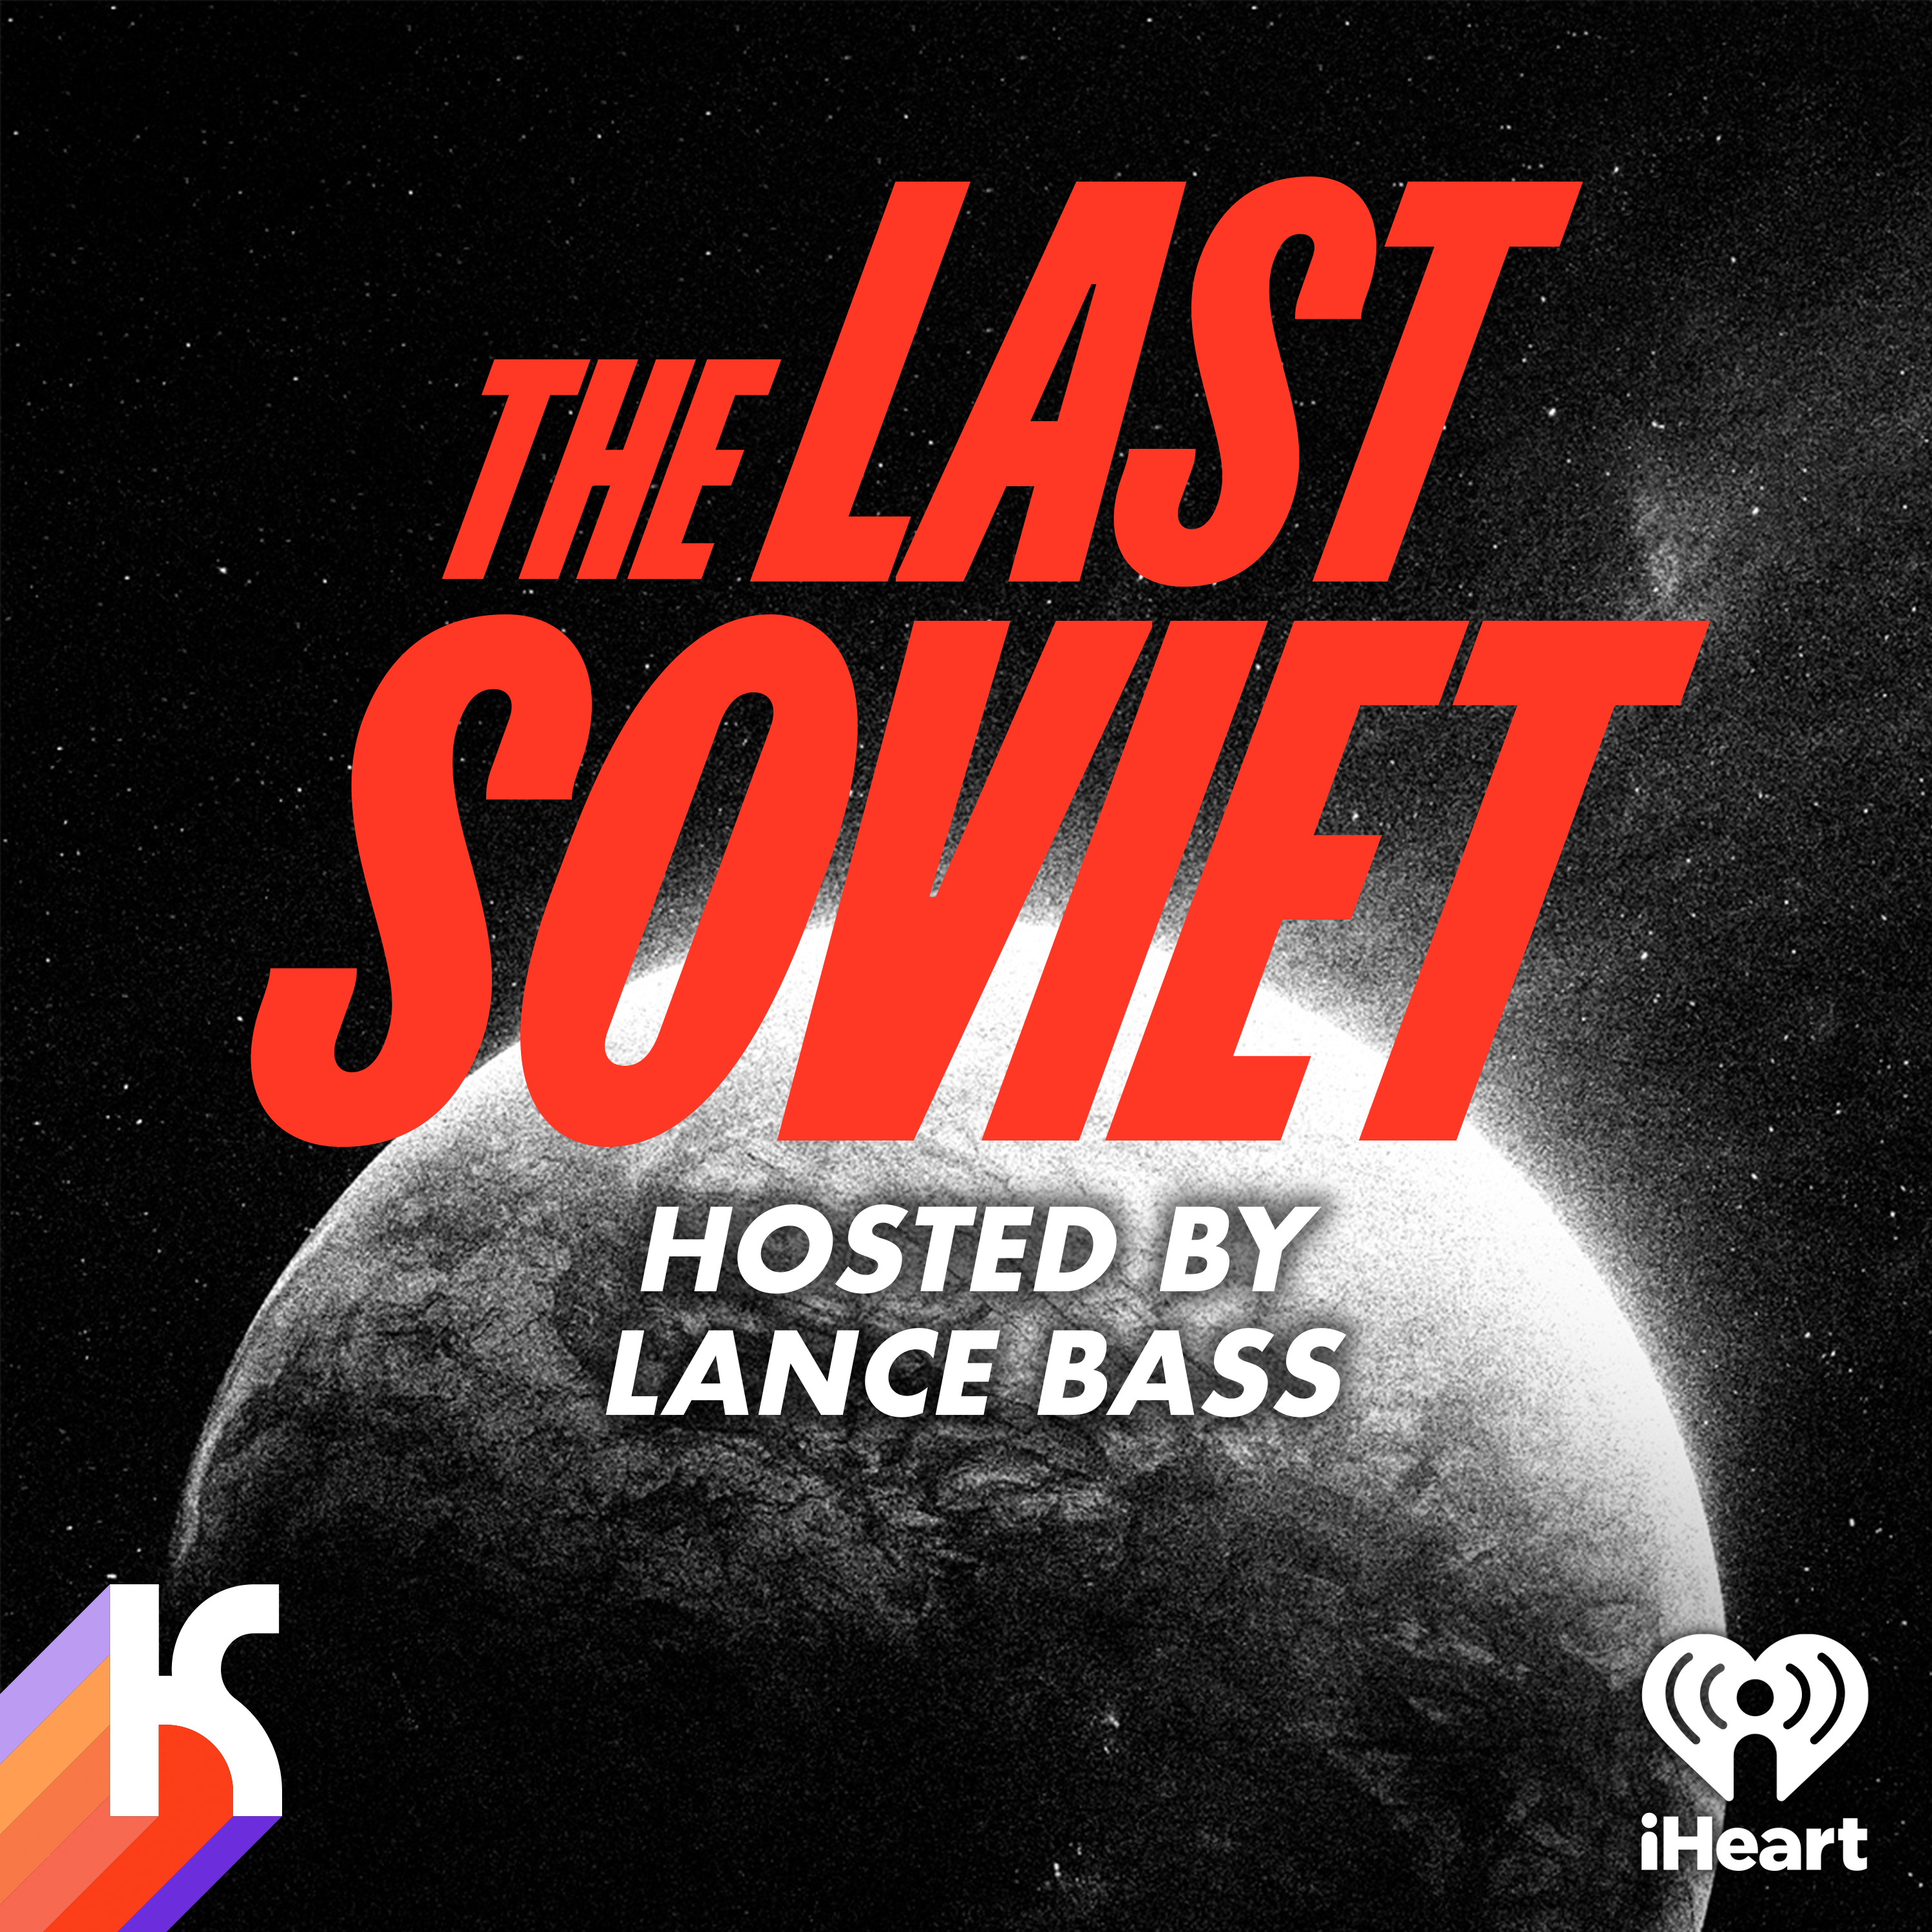 THE LAST SOVIET - EP 5: Three Hot Days in August